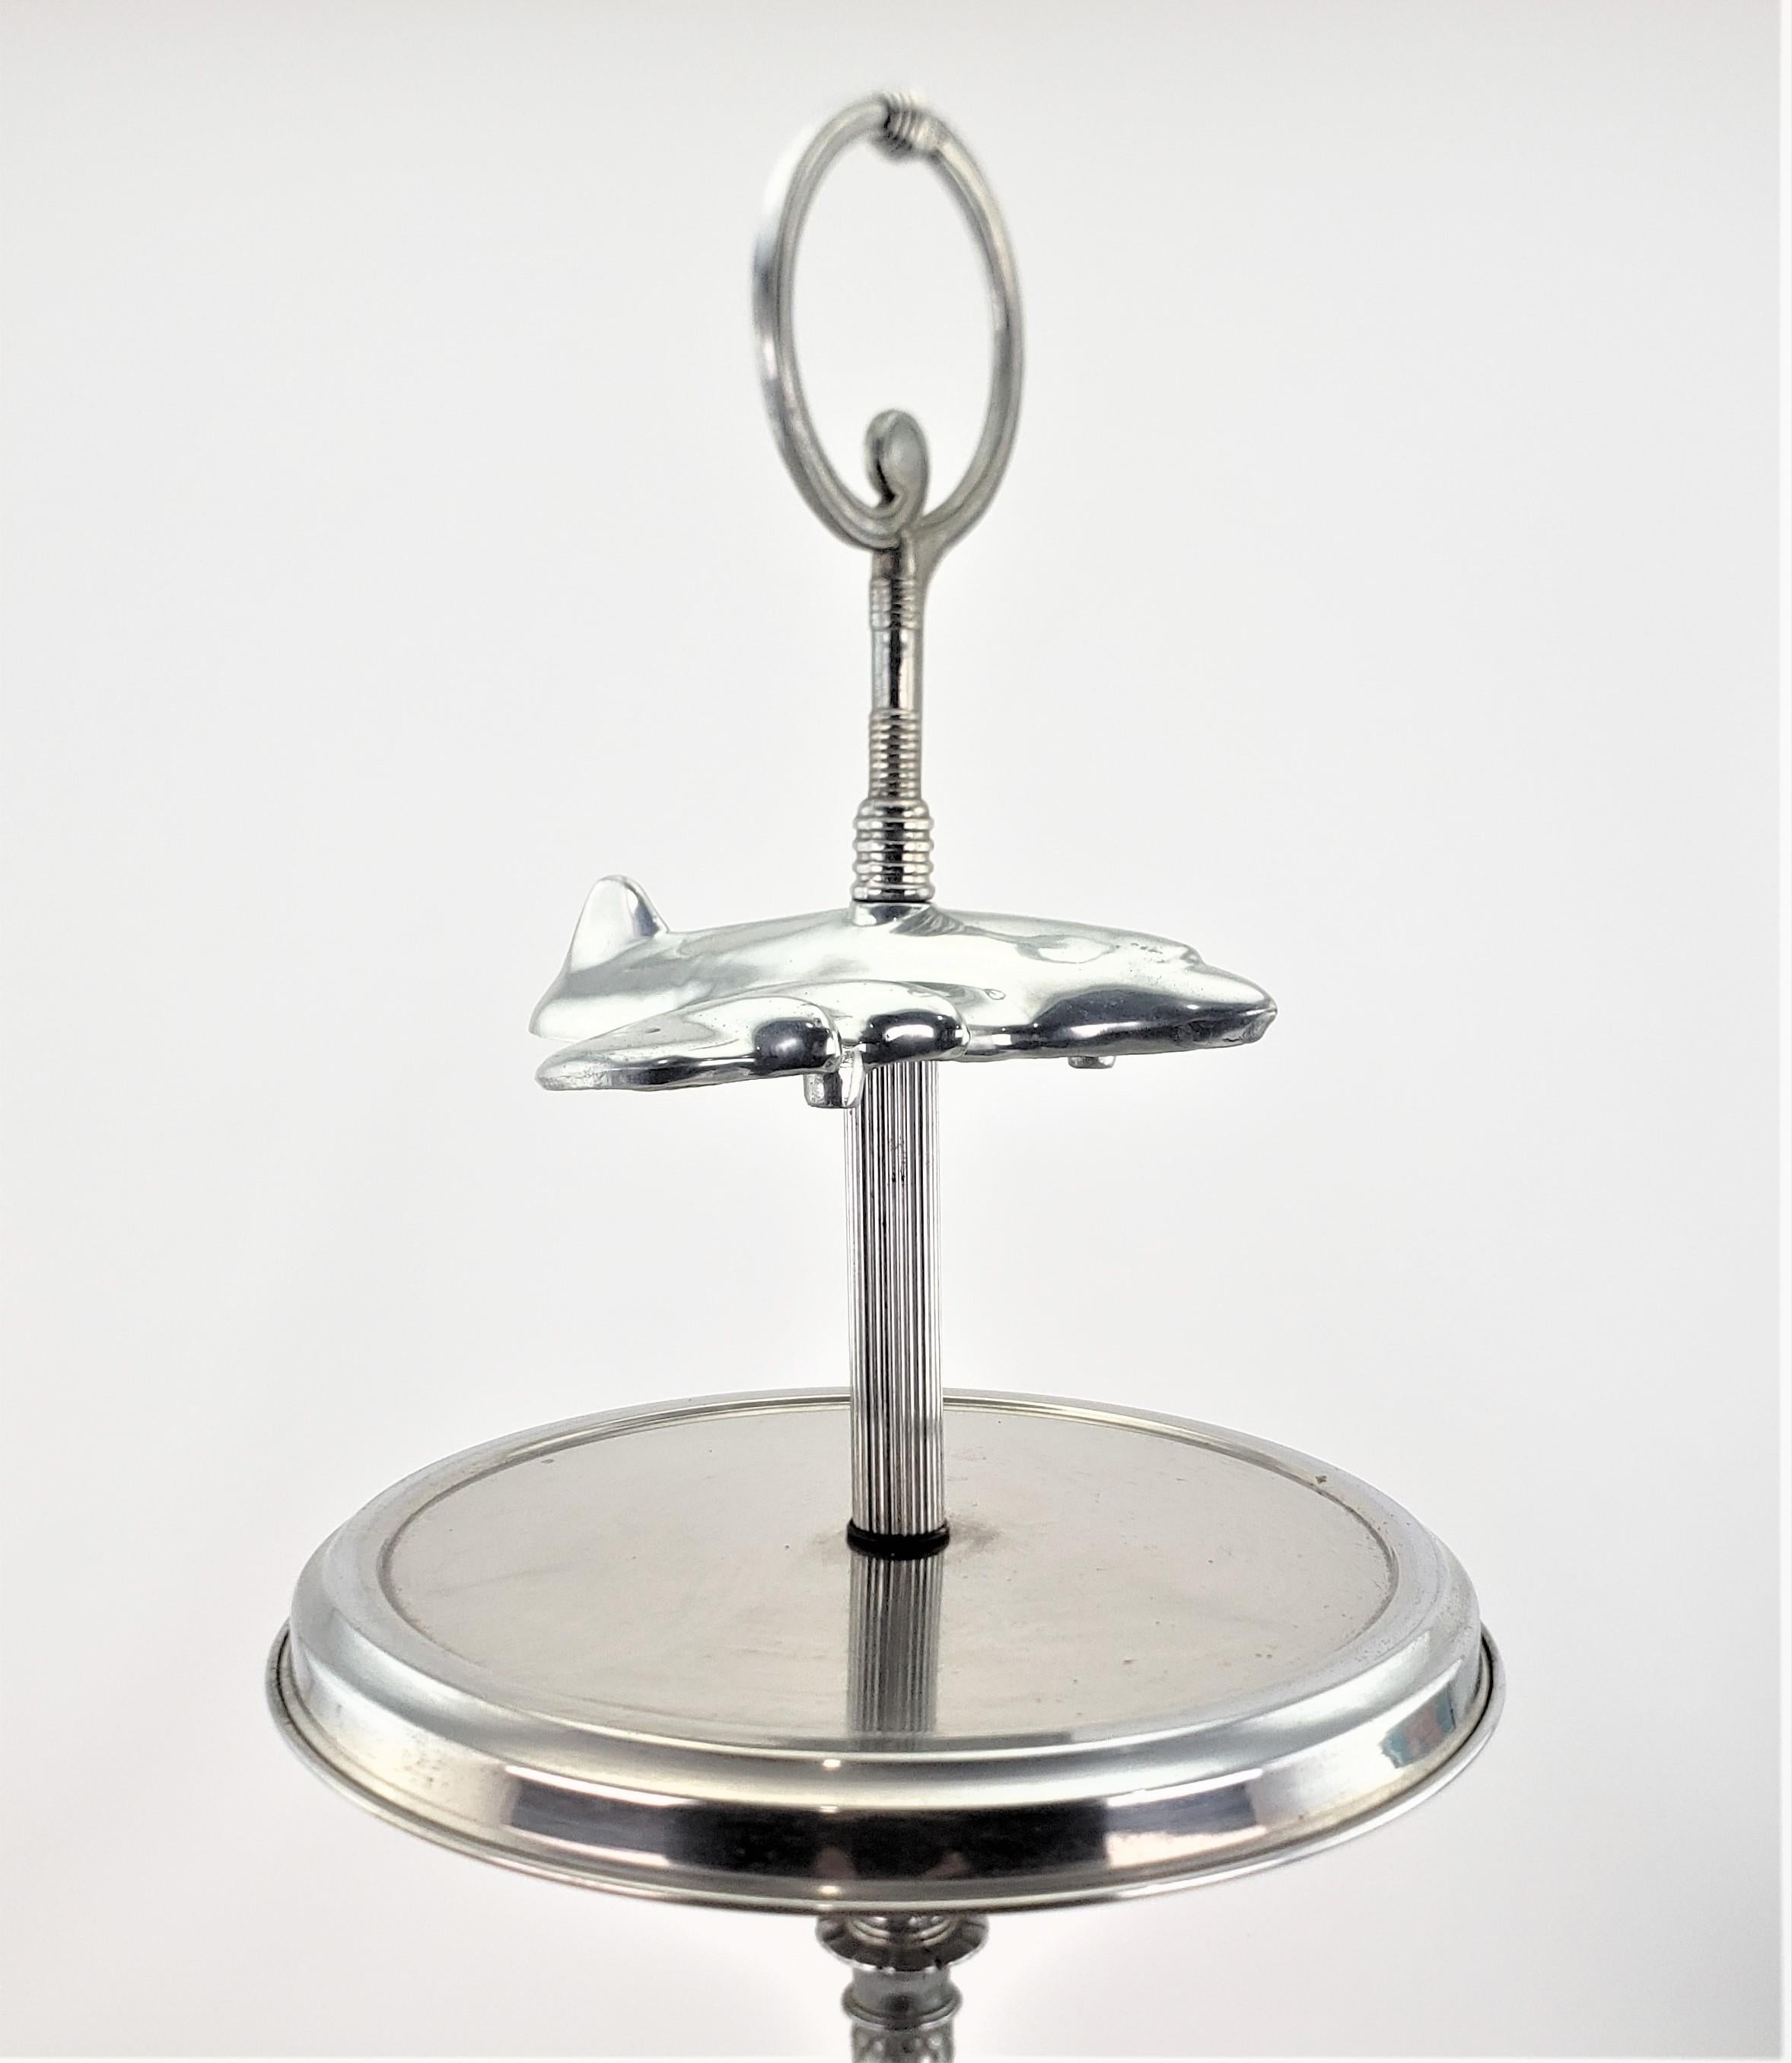 Unique Art Deco Styled Chrome Jet Airplane Lighted Smoker's Stand or Table For Sale 1